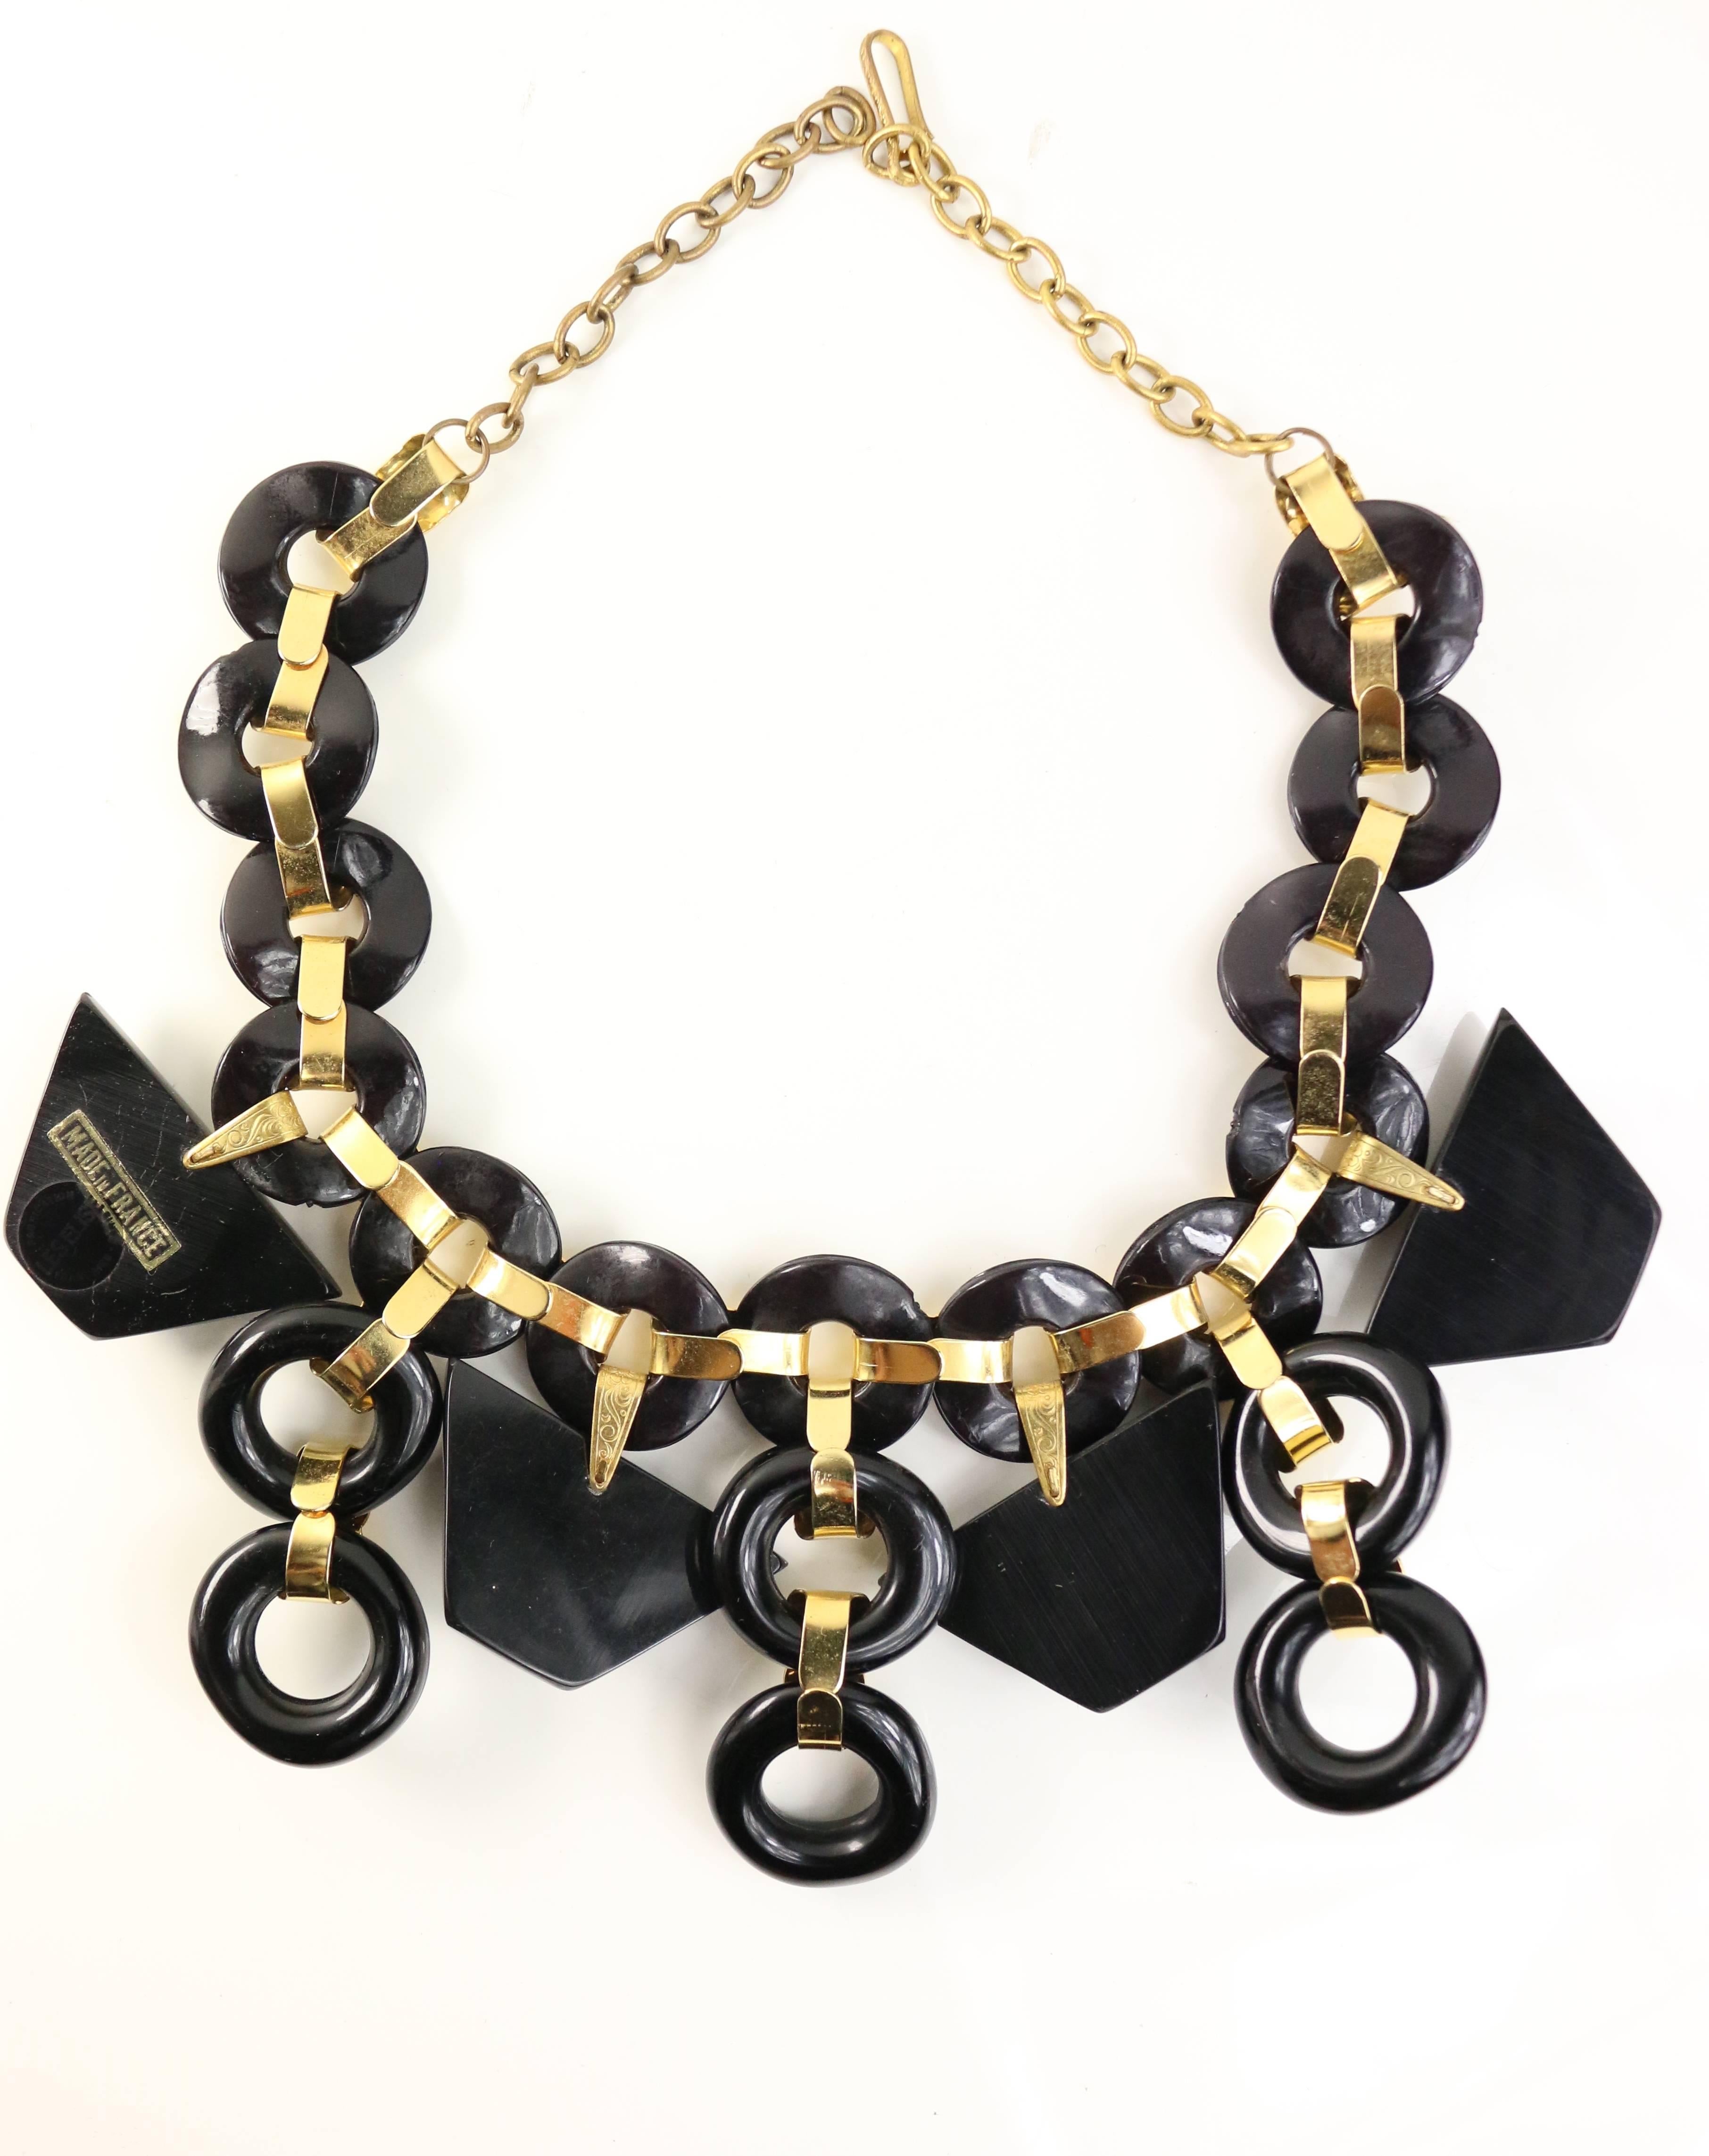 - Vintage 90s Les Elise Paris black with gold chain link necklace. 

- Featuring black drop octagon and round shapes. 

- Made in France. 

- Long: 17 inches. Height: 11 inches. 

